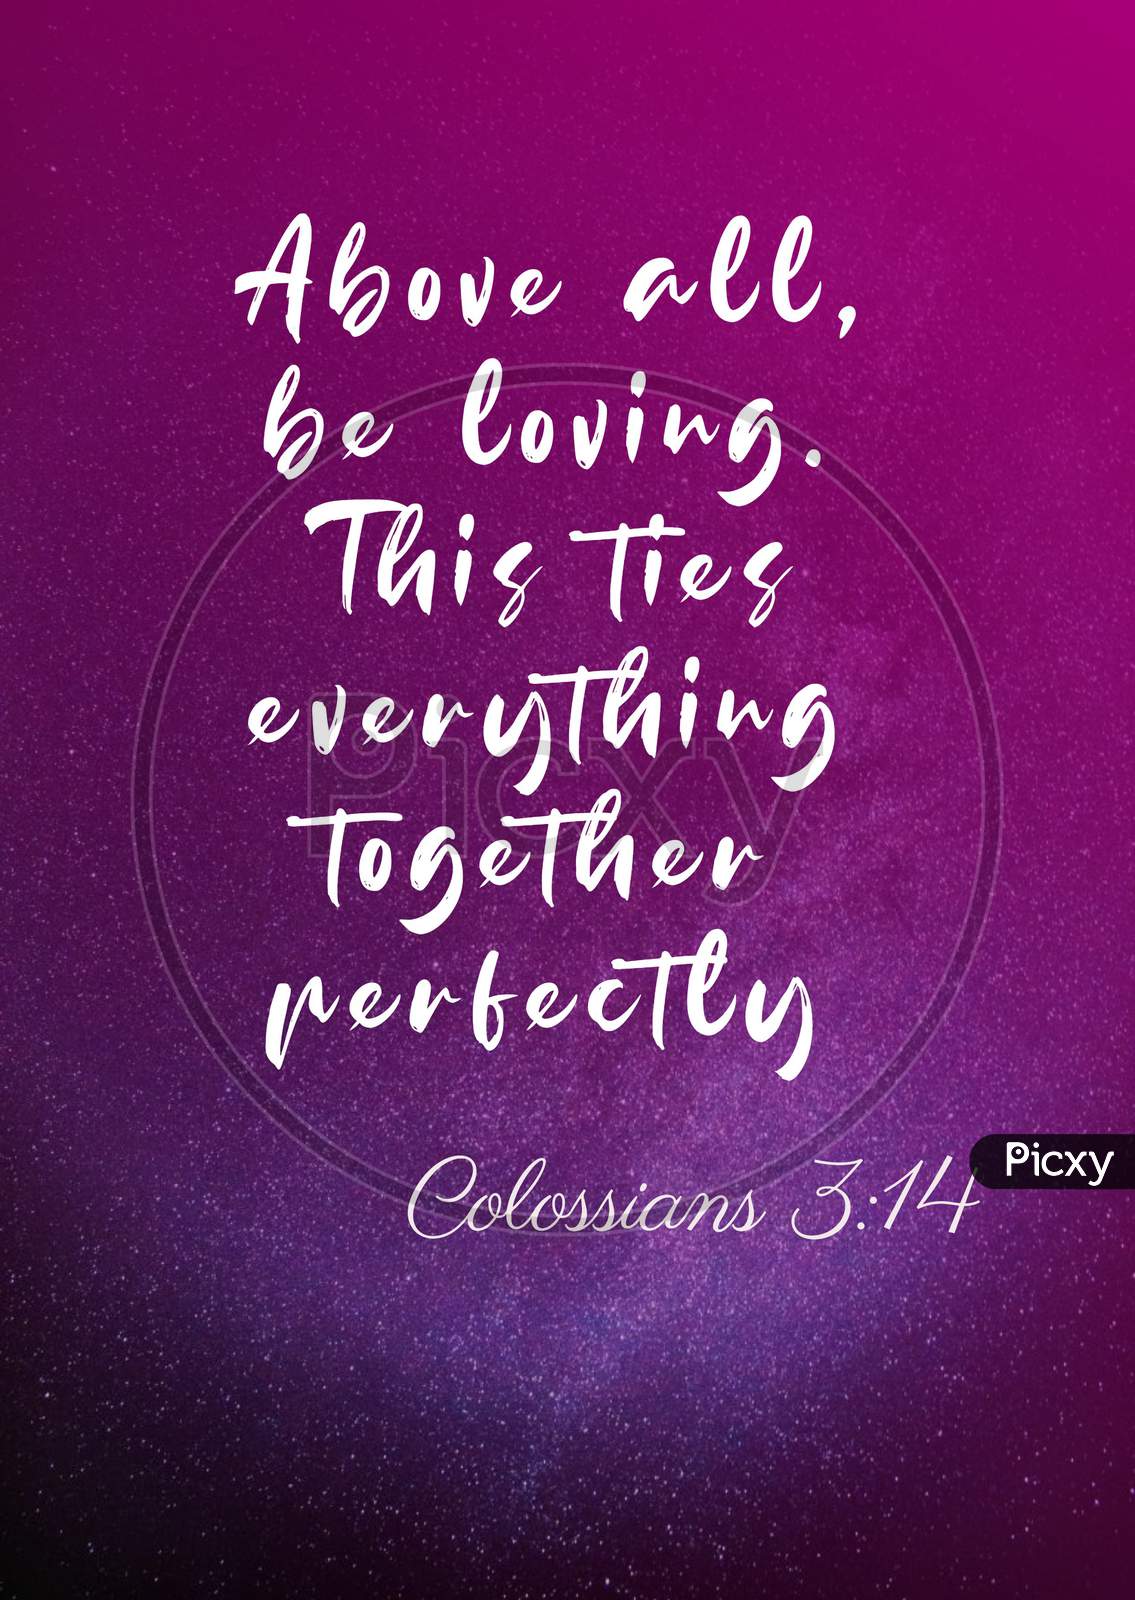 Bible Words  Colossians  3:14 " Above All Be Loving This Ties Every Thing Together Perfectly "